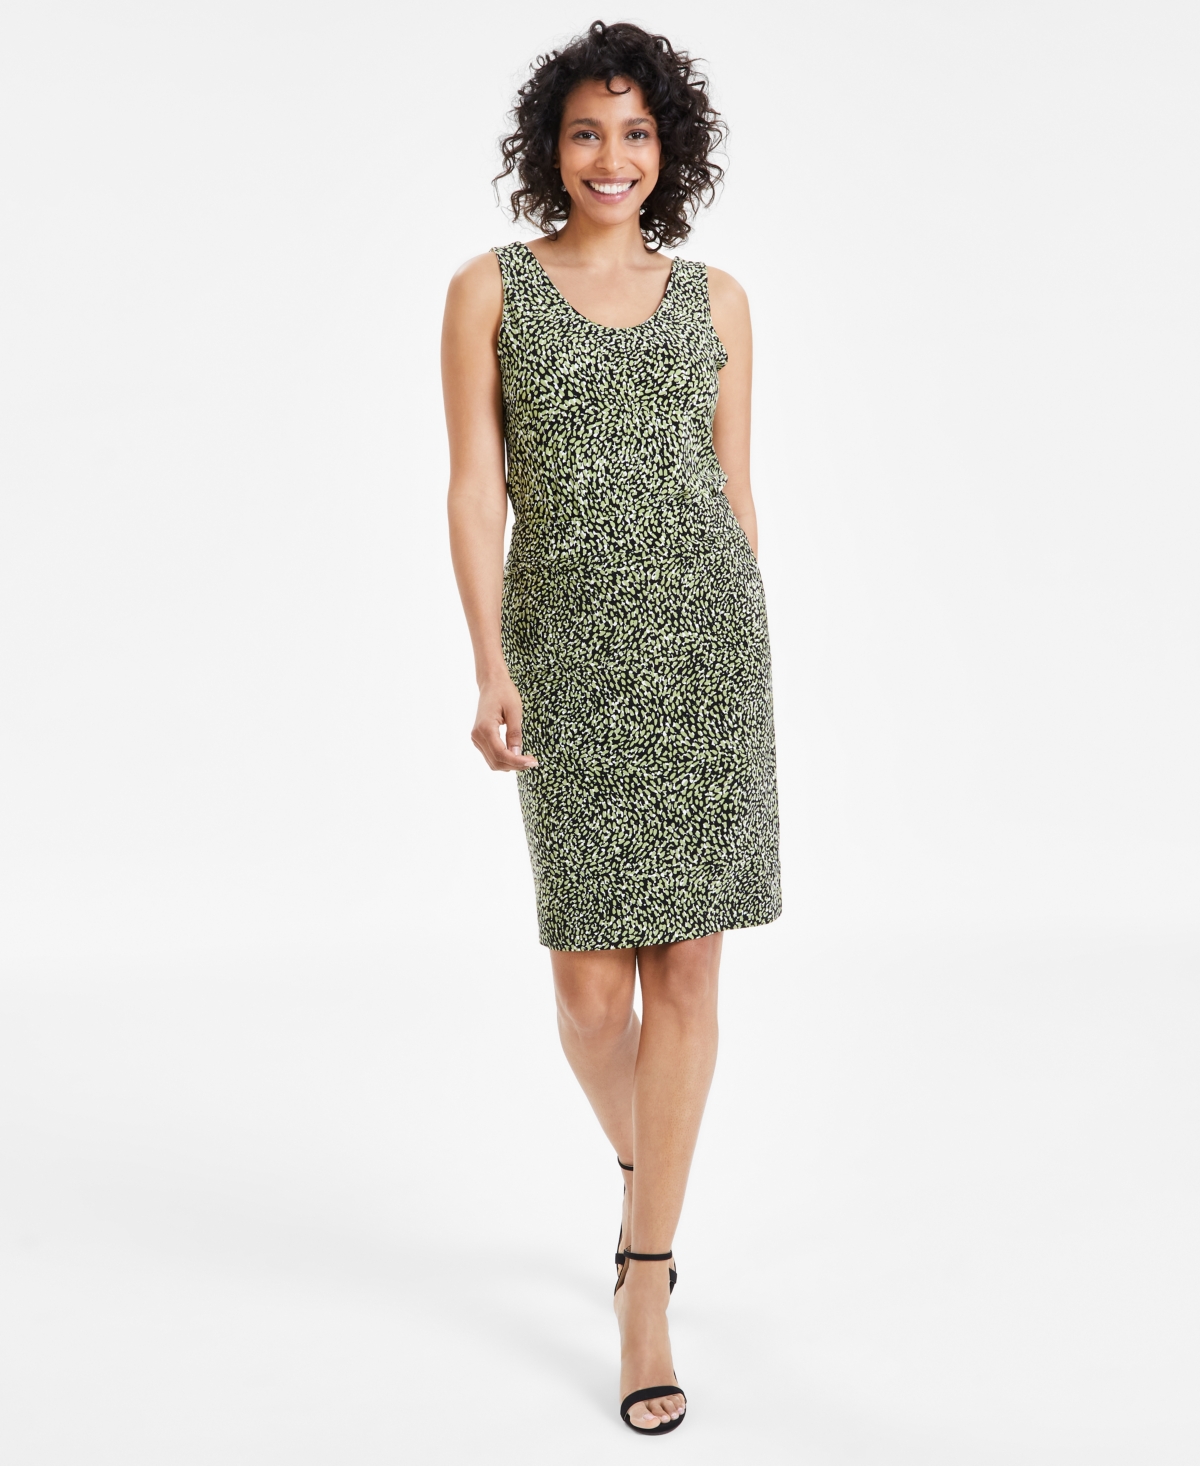 Women's Printed Pull-On Pencil Skirt - Leafy Green